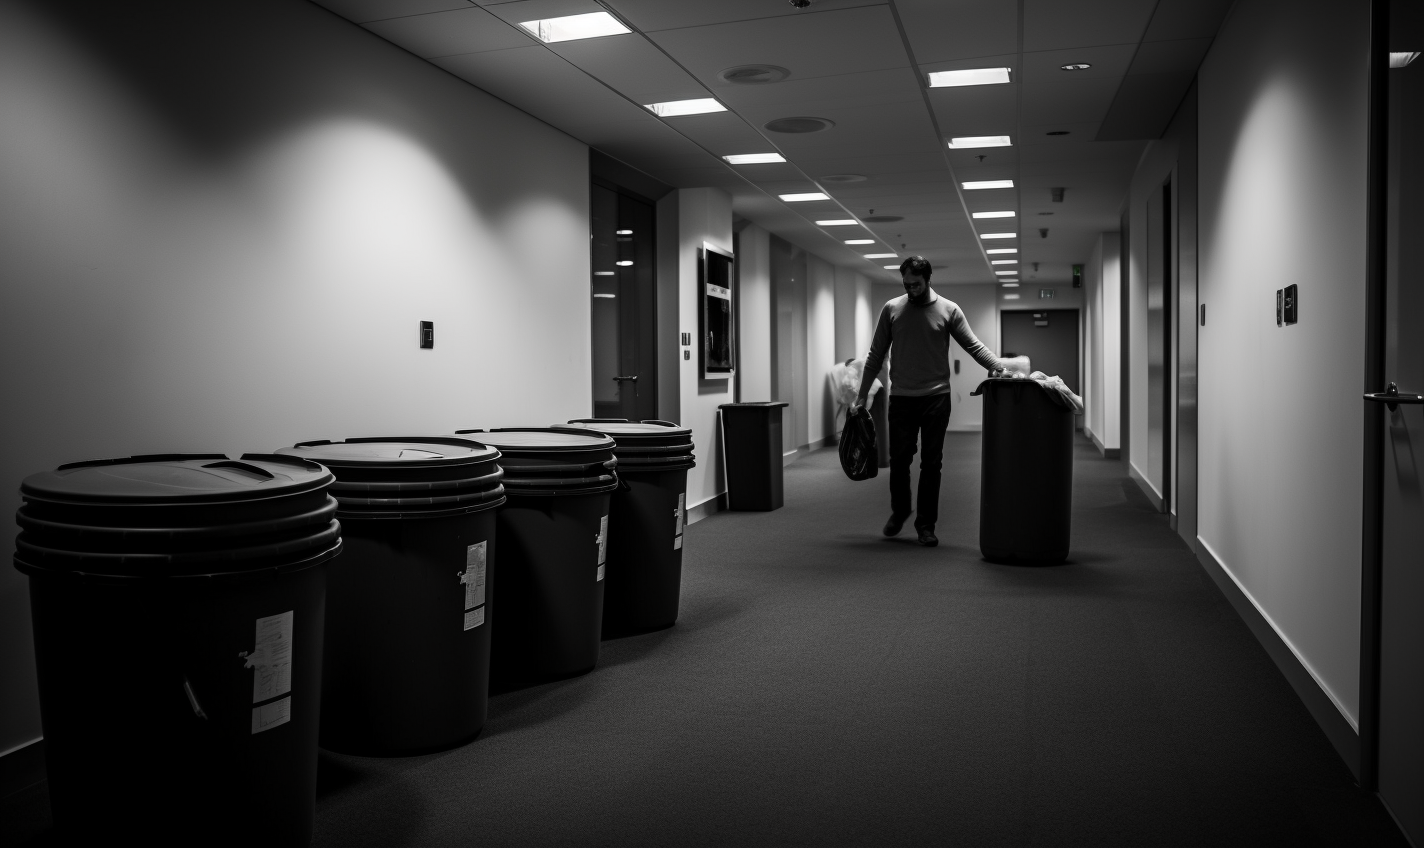 Men Janitor Empty Trash Cans In Office